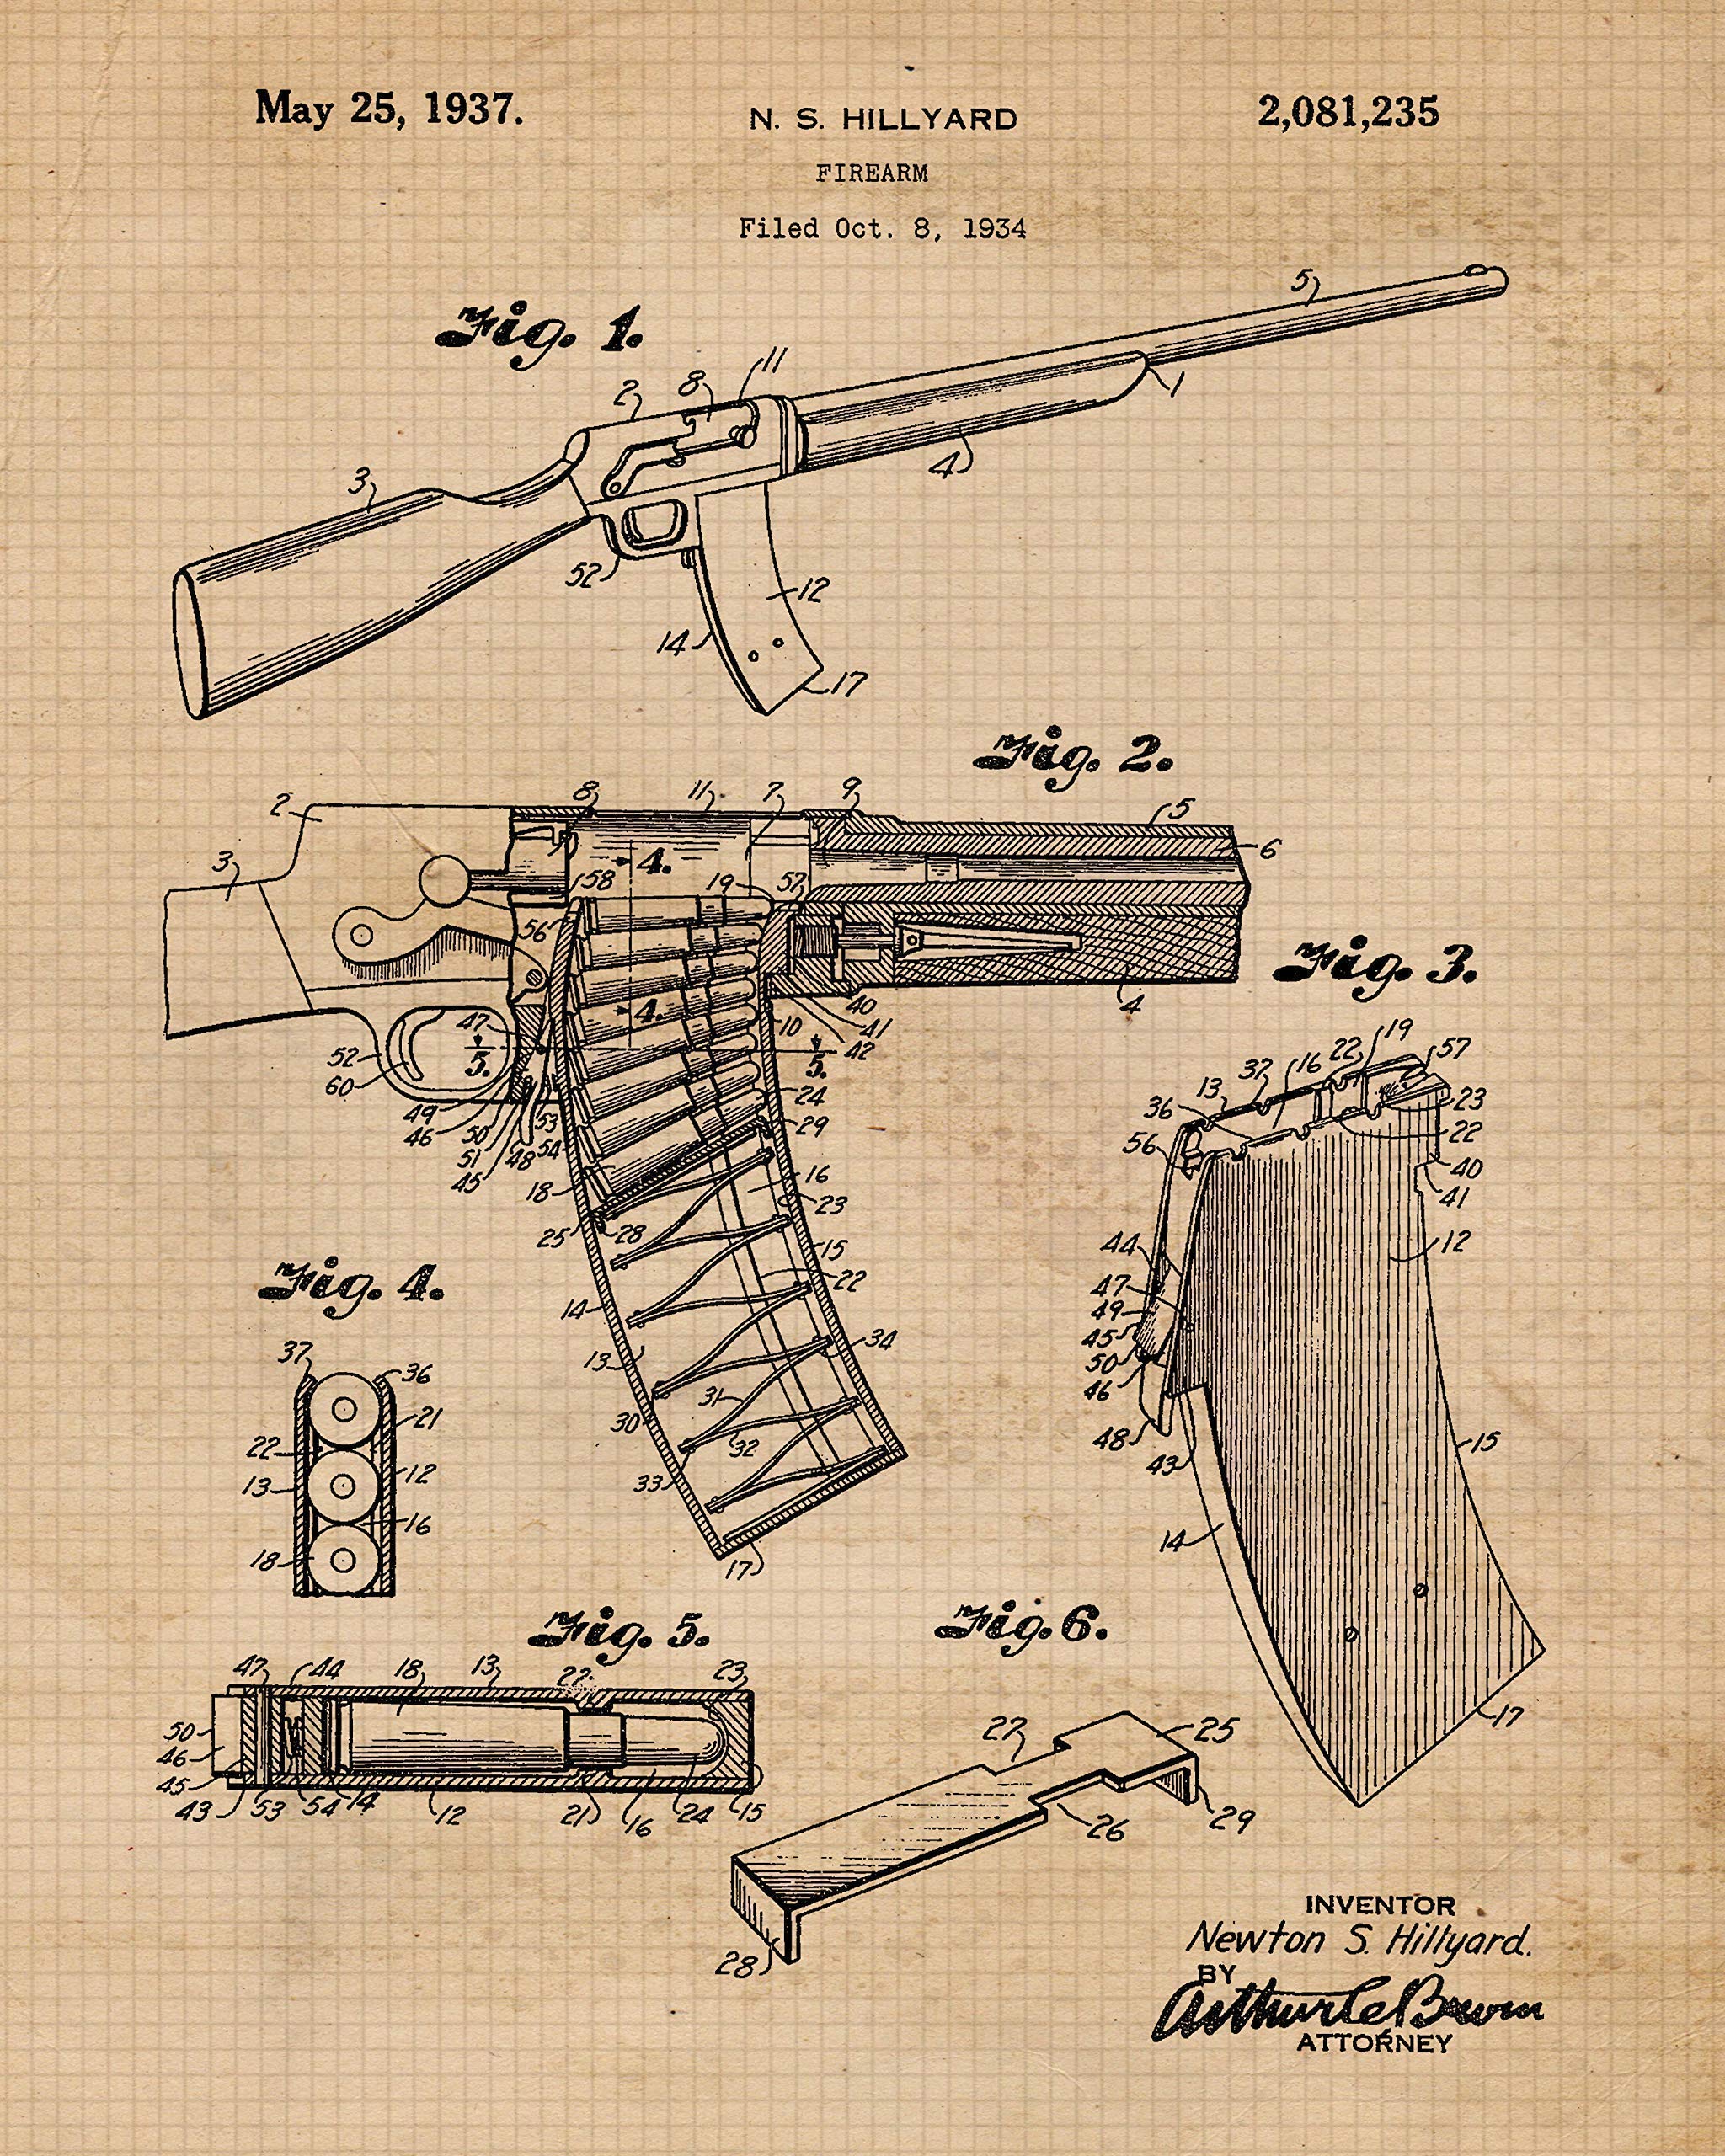 Vintage Firearms Patent Prints, 4 (8x10) Unframed Photos, Wall Art Decor Gifts for Home Remington Office Studio Pistol Rifle Gears Ammo Garage Shop Student Teacher Coach Cowboys Safety Instructor